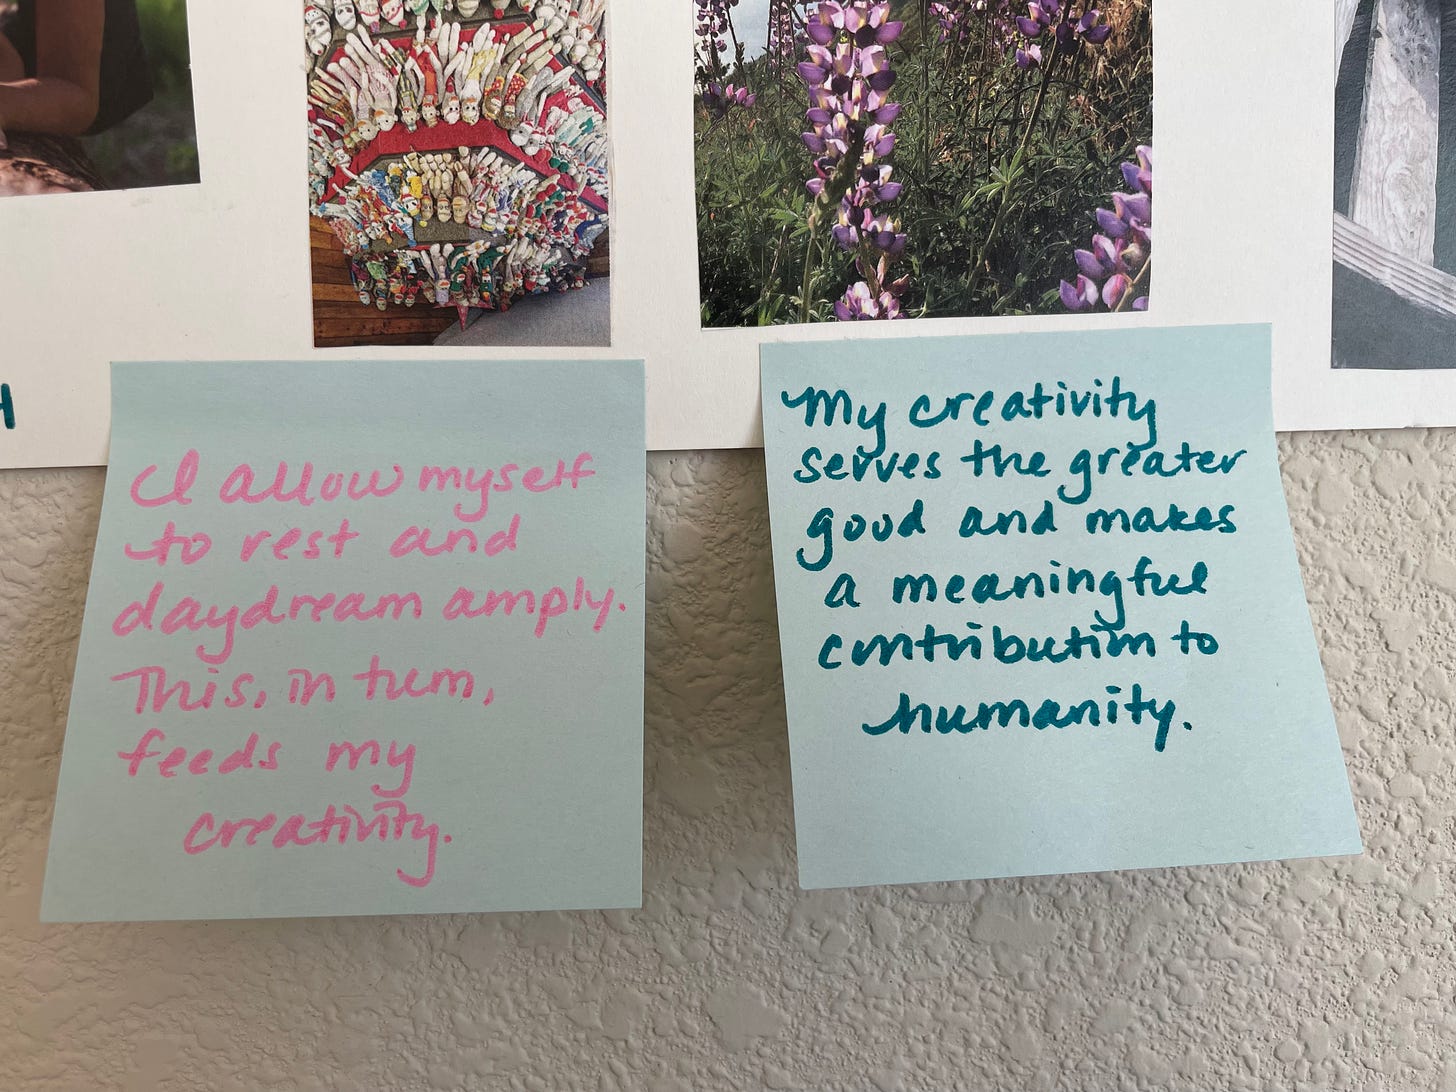 Two blue sticky notes attached to a white poster. The one on the left, written in pink marker, says: “I allow myself to rest and daydream amply. This, in turn, feeds my creativity.” The one on the right, written in blue marker, says: “My creativity serves the greater good and makes a meaningful contribution to humanity."